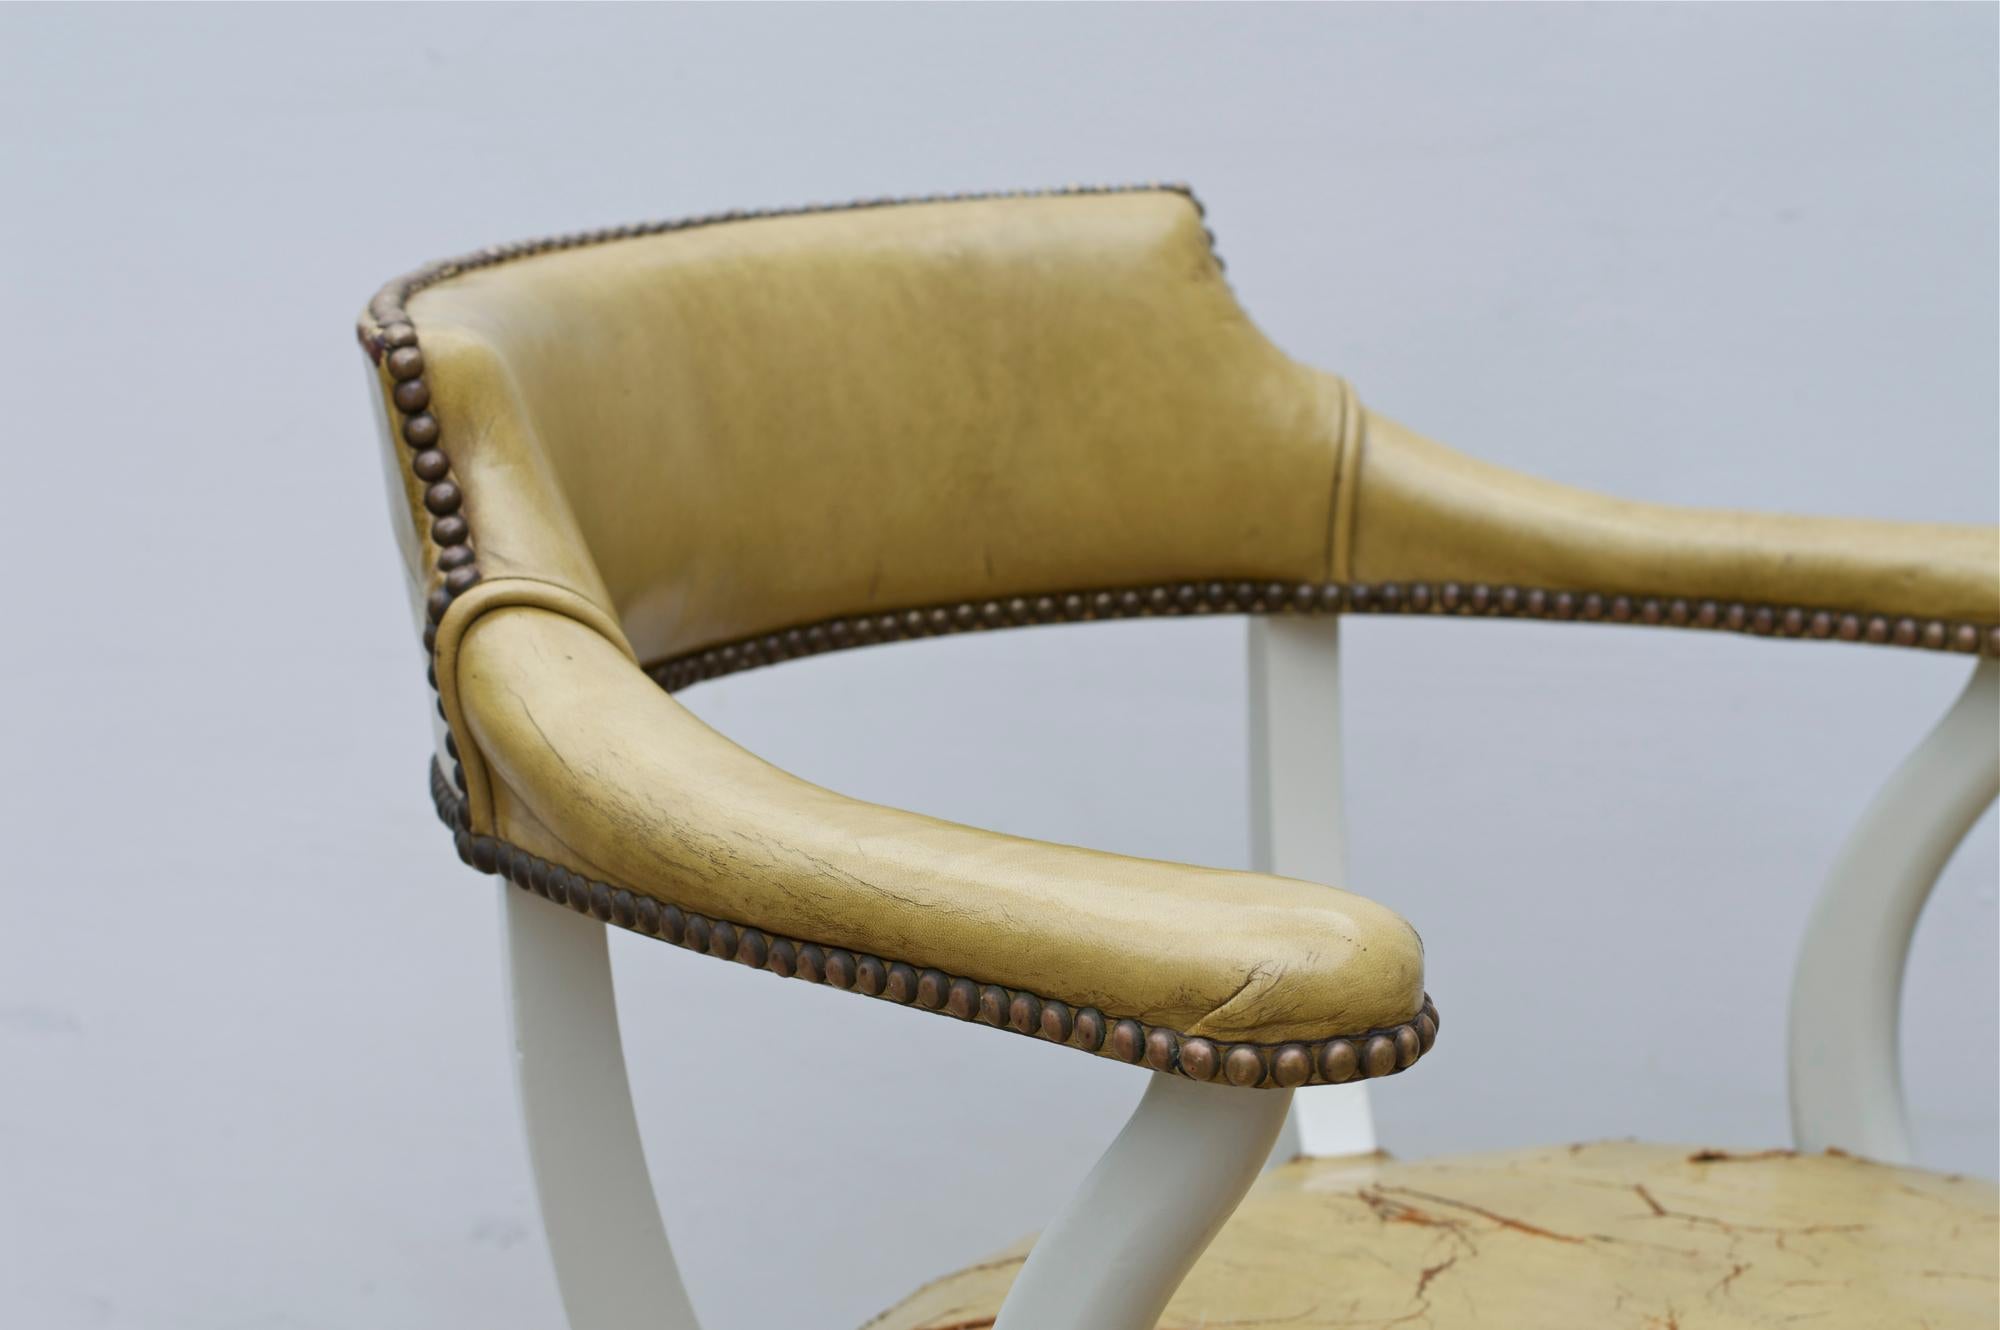 Lacquered Vintage English Leather Desk Chair